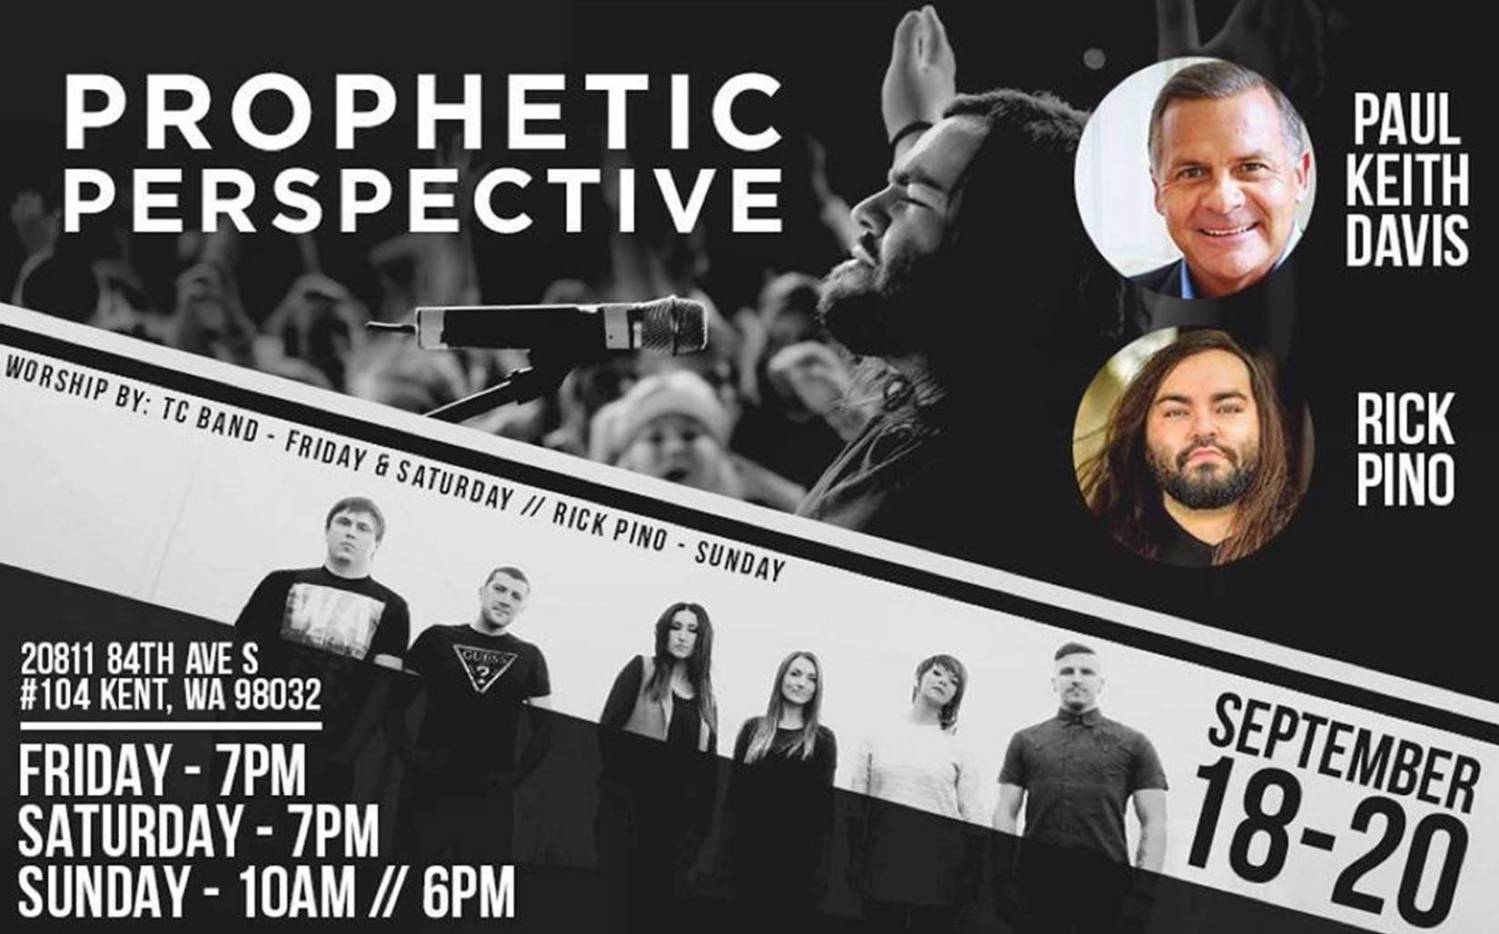 Prophetic Perspective Conference with Paul Kith Davis, Rick Pino and TC-Band (September 18-20 2015)